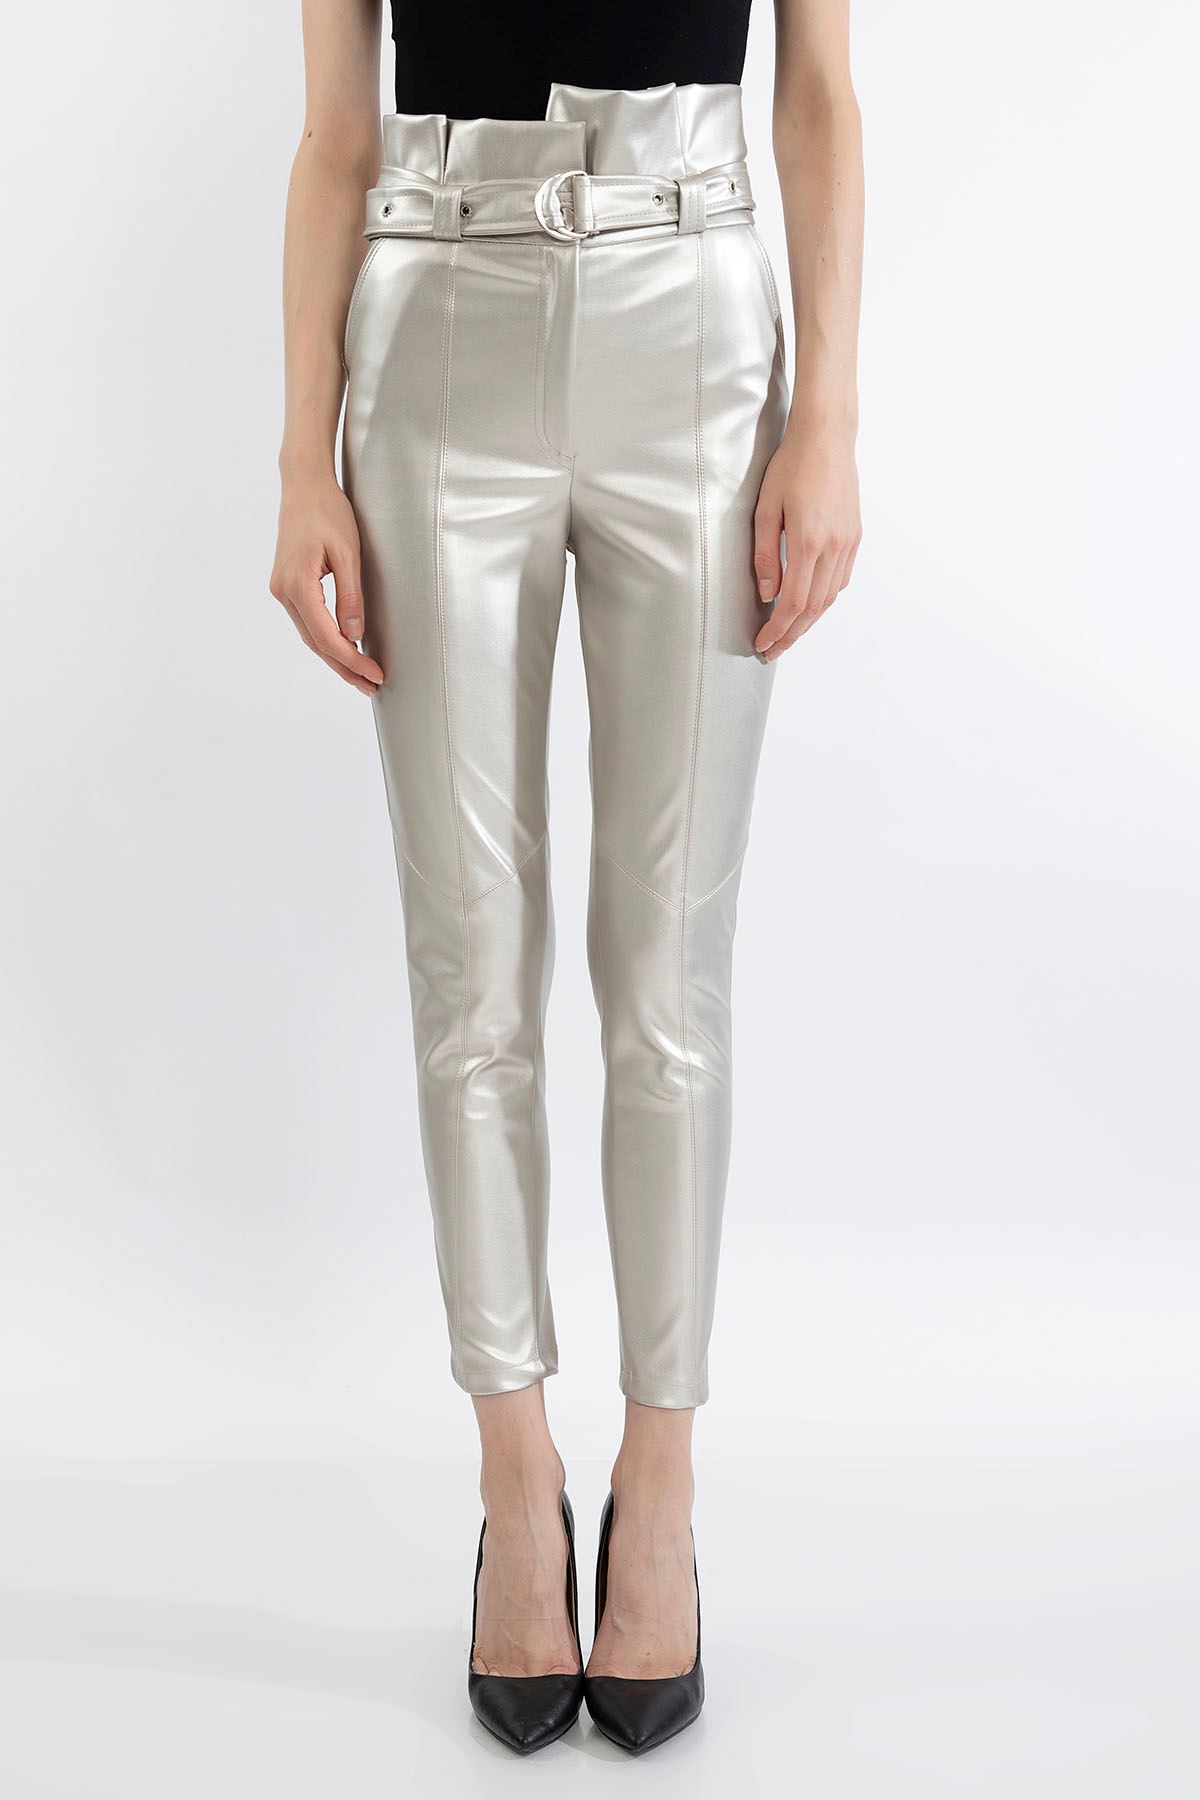 Zara Leather Fabric Ankle Length Tight Fit High Waist Belt Women'S Trouser - Silver